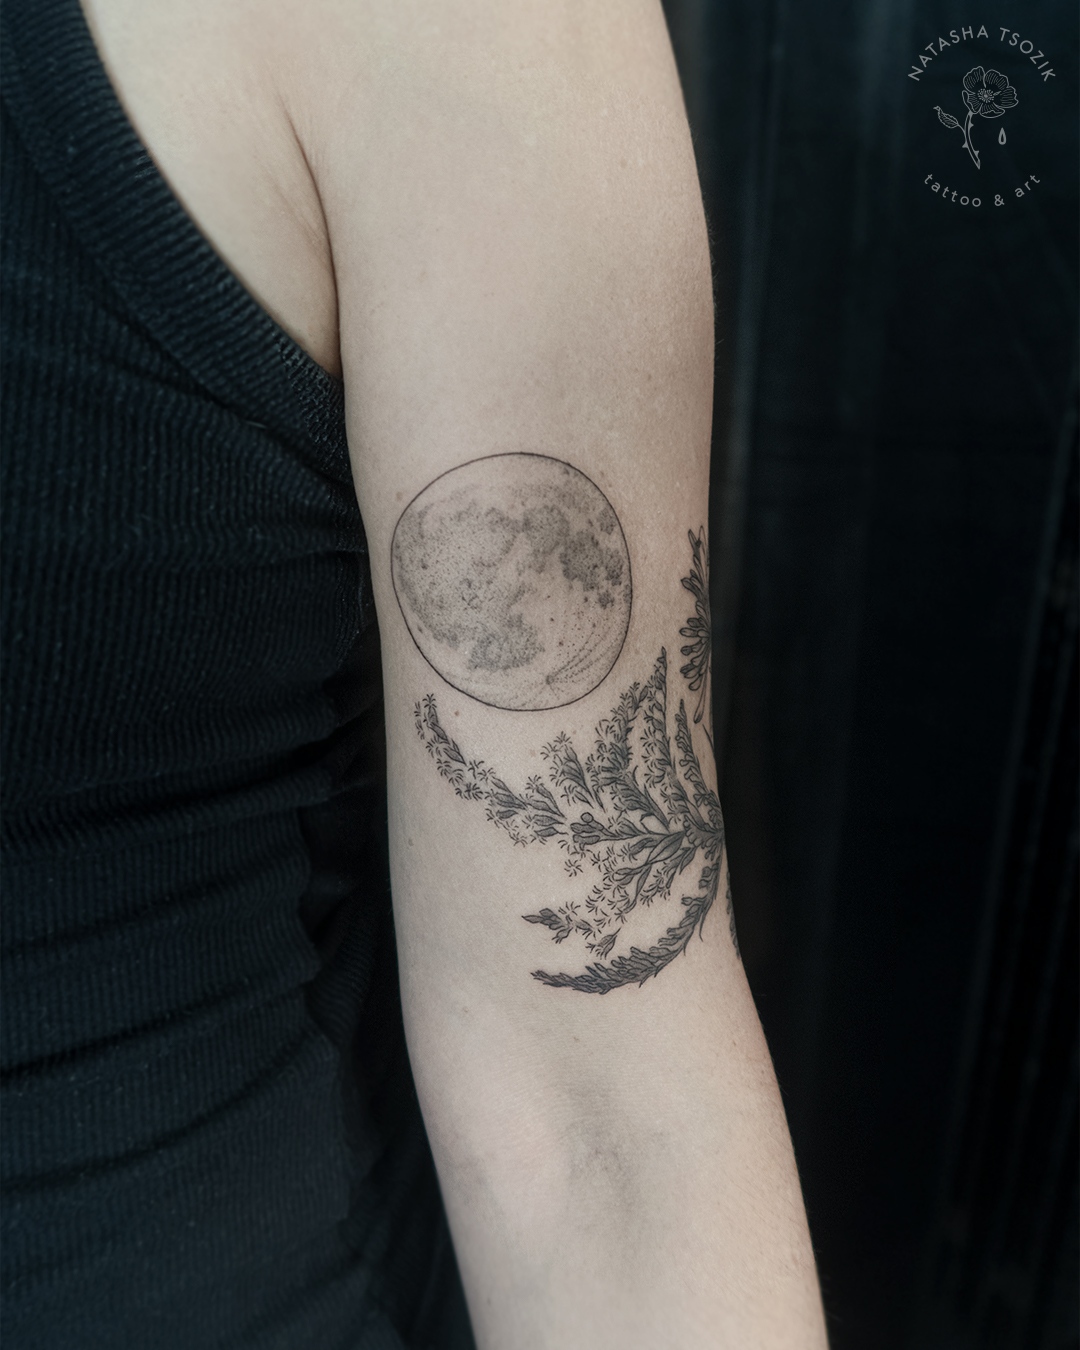 A close-up of a moon tattoo above a floral piece.